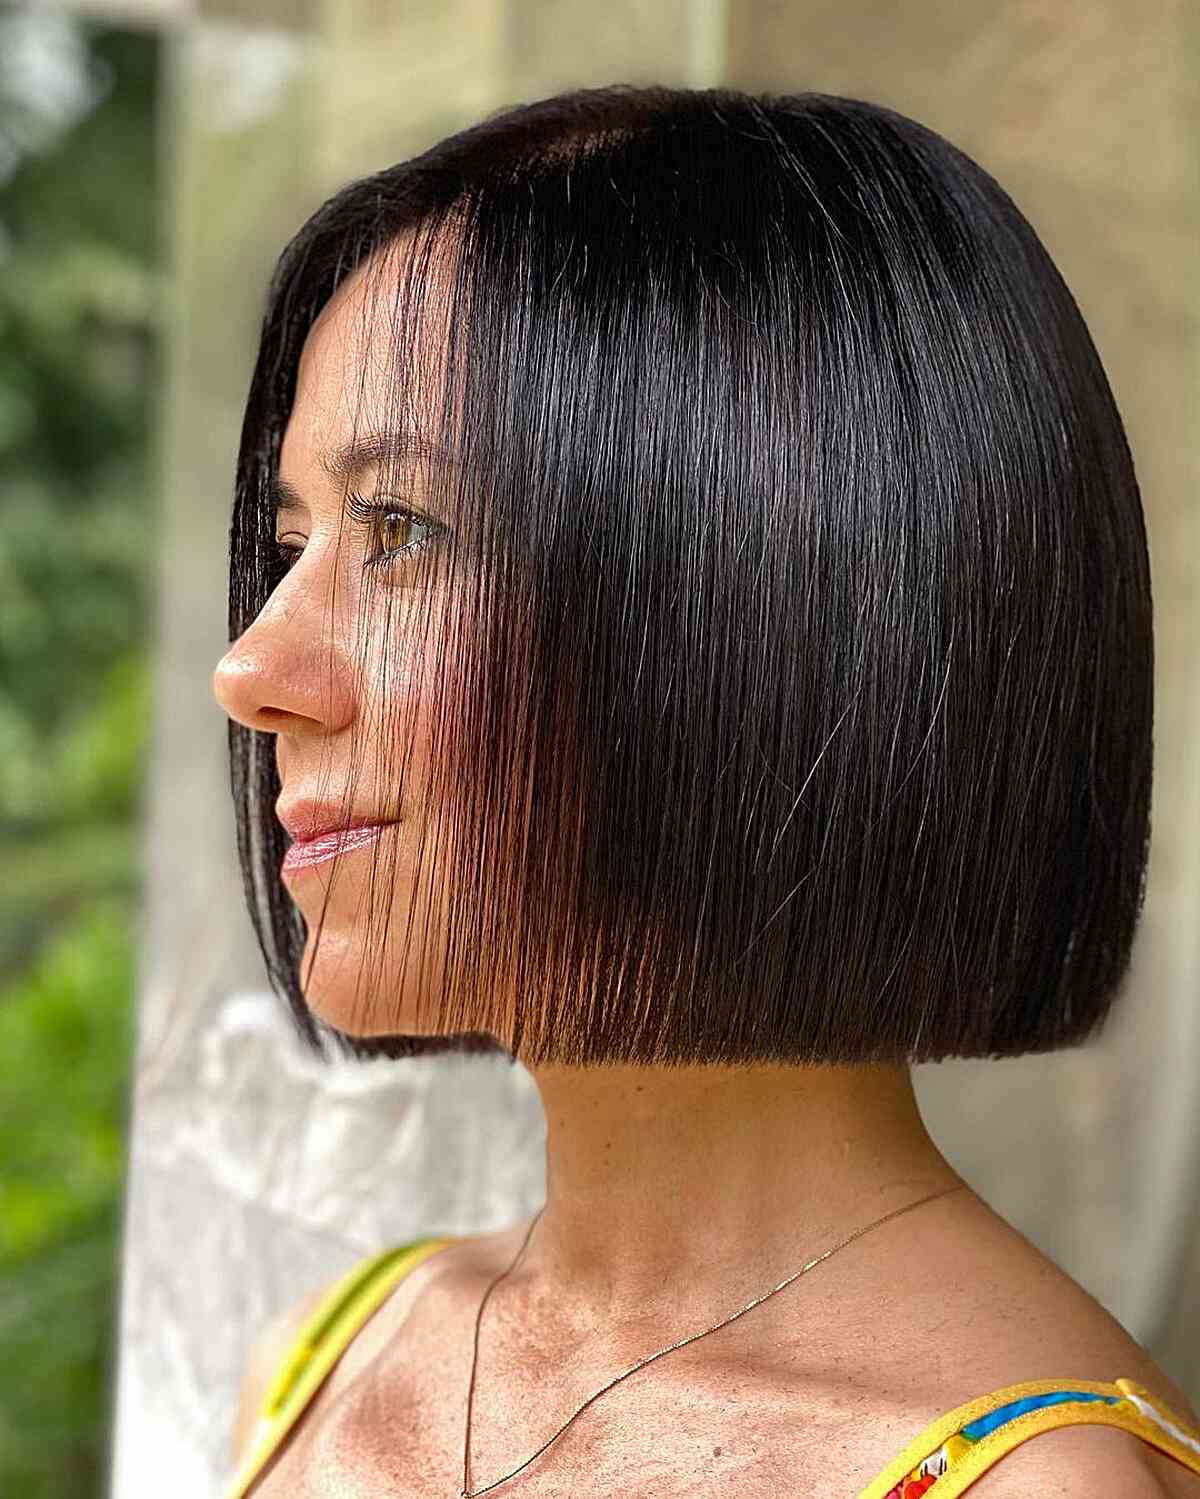 52 Bob Haircut Ideas To Stand Out From The Crowd in 2023